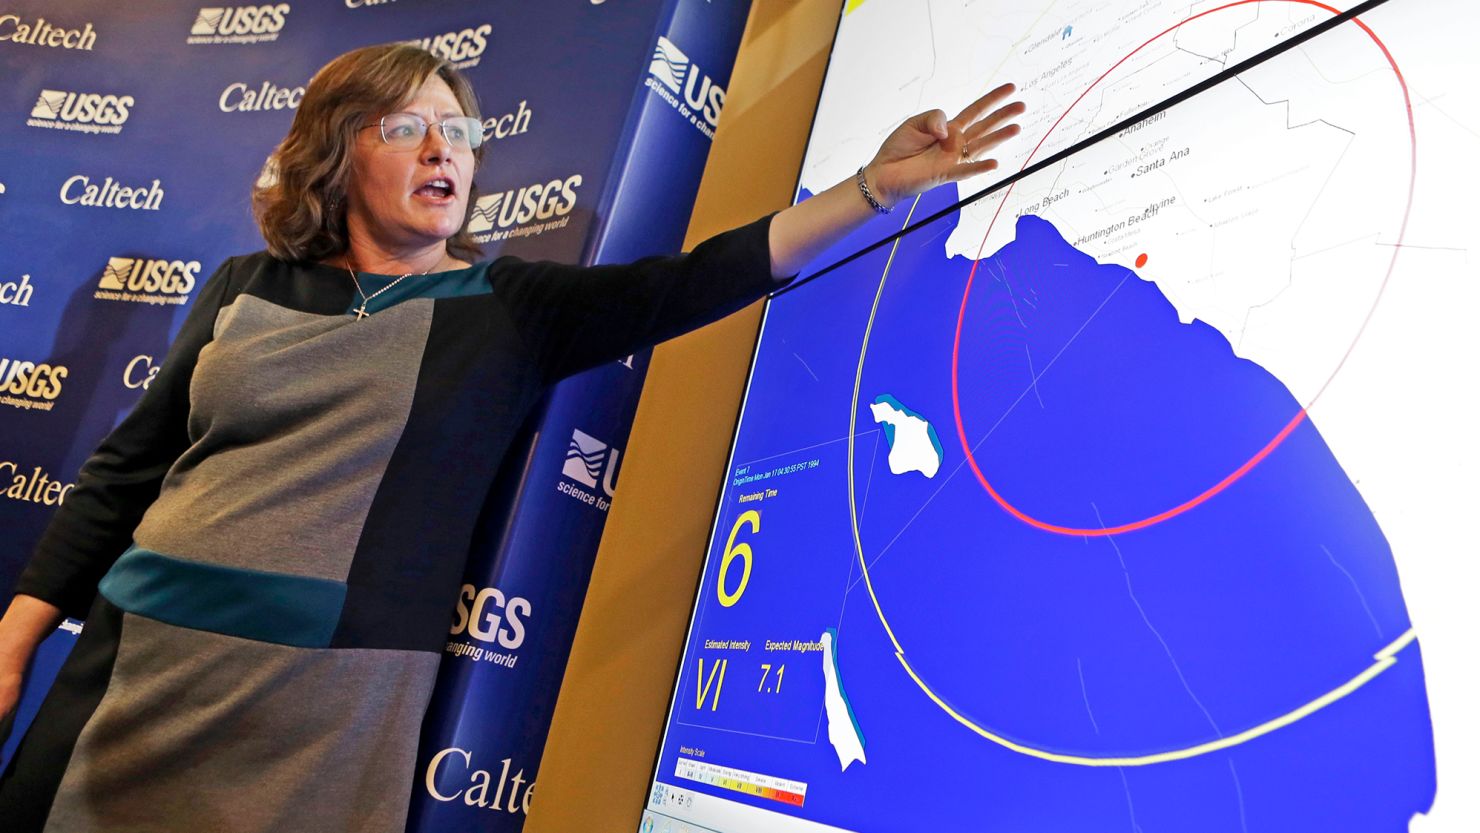 Seismologist, Dr. Lucy Jones, describes how an early warning system would provide advance warning of an earthquake.